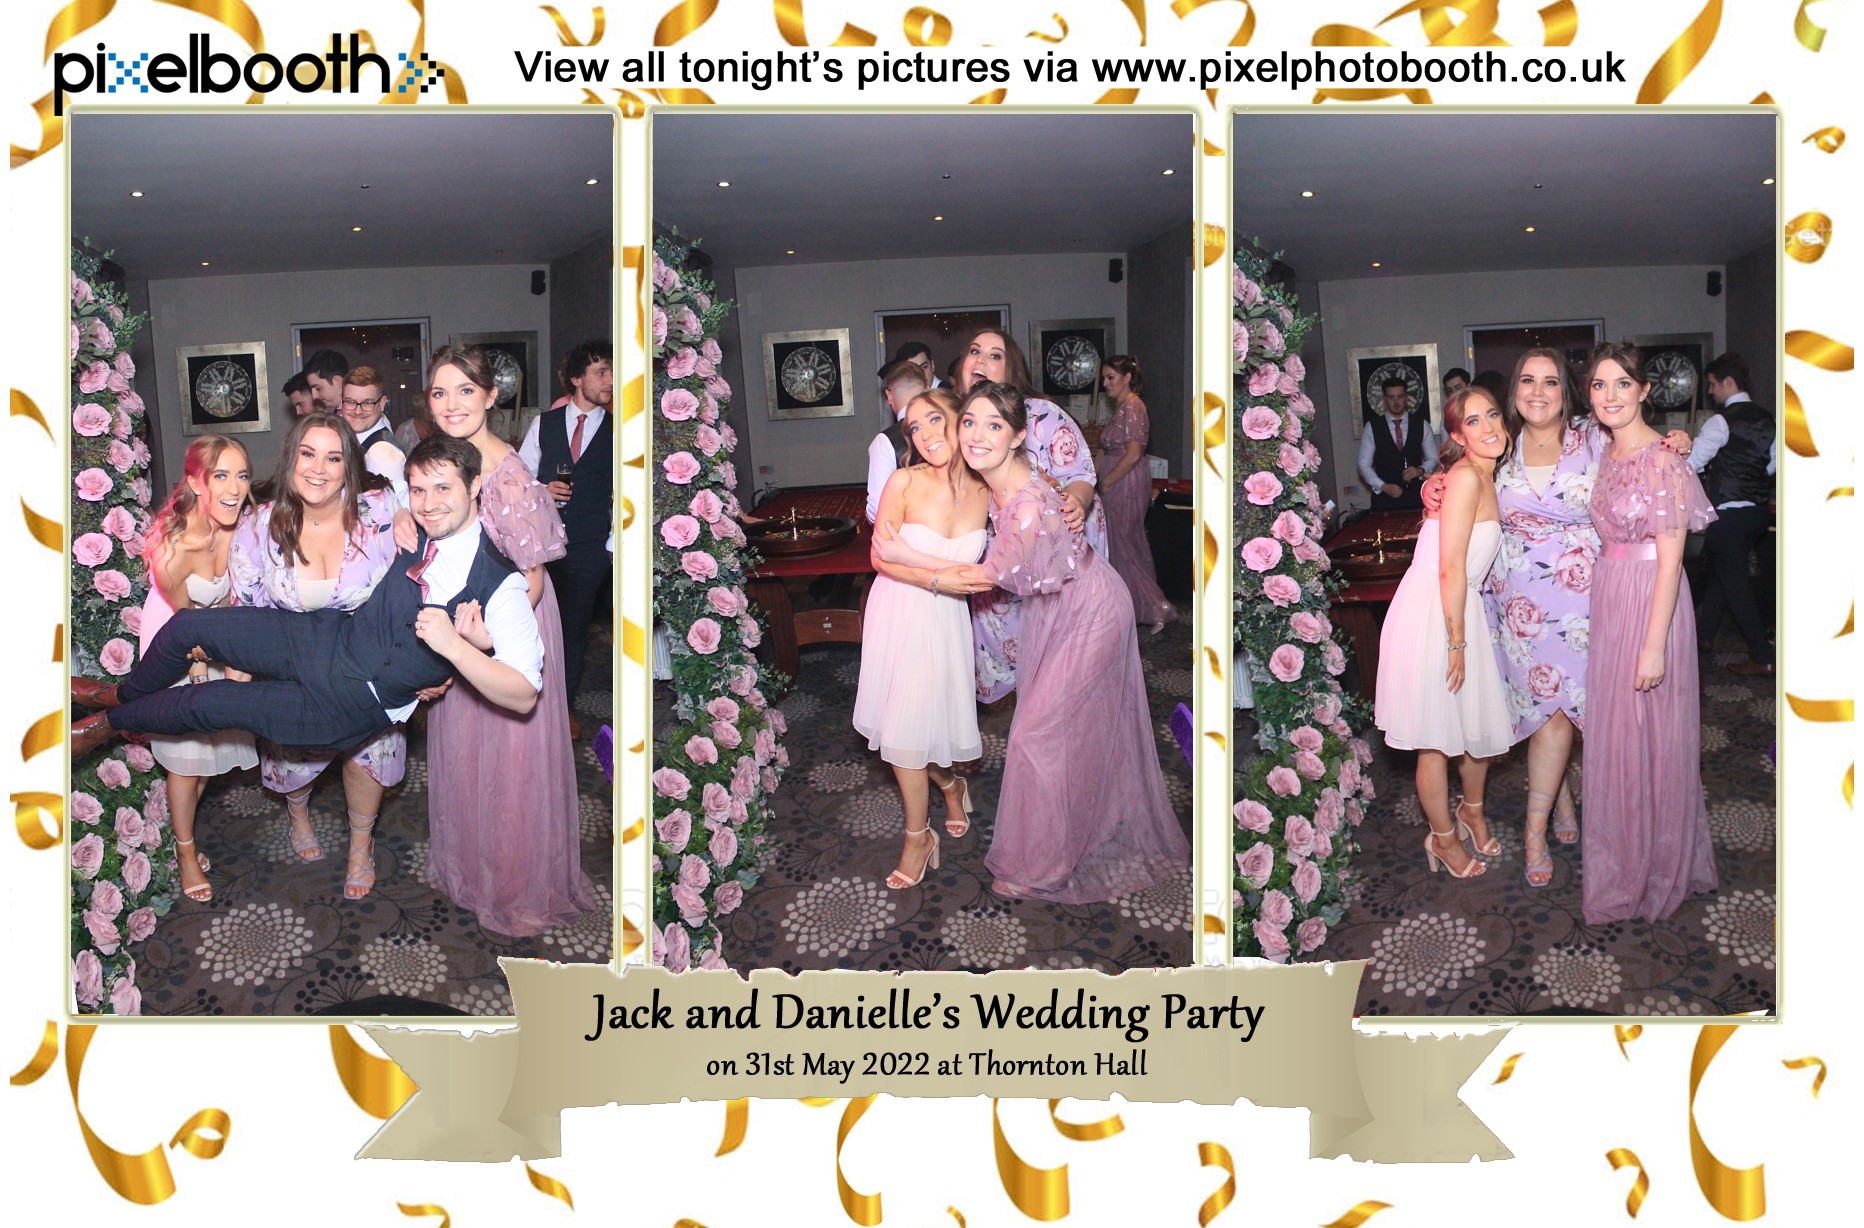 31st May 2022: Jack and Danielle's Wedding Party at Thornton Hall